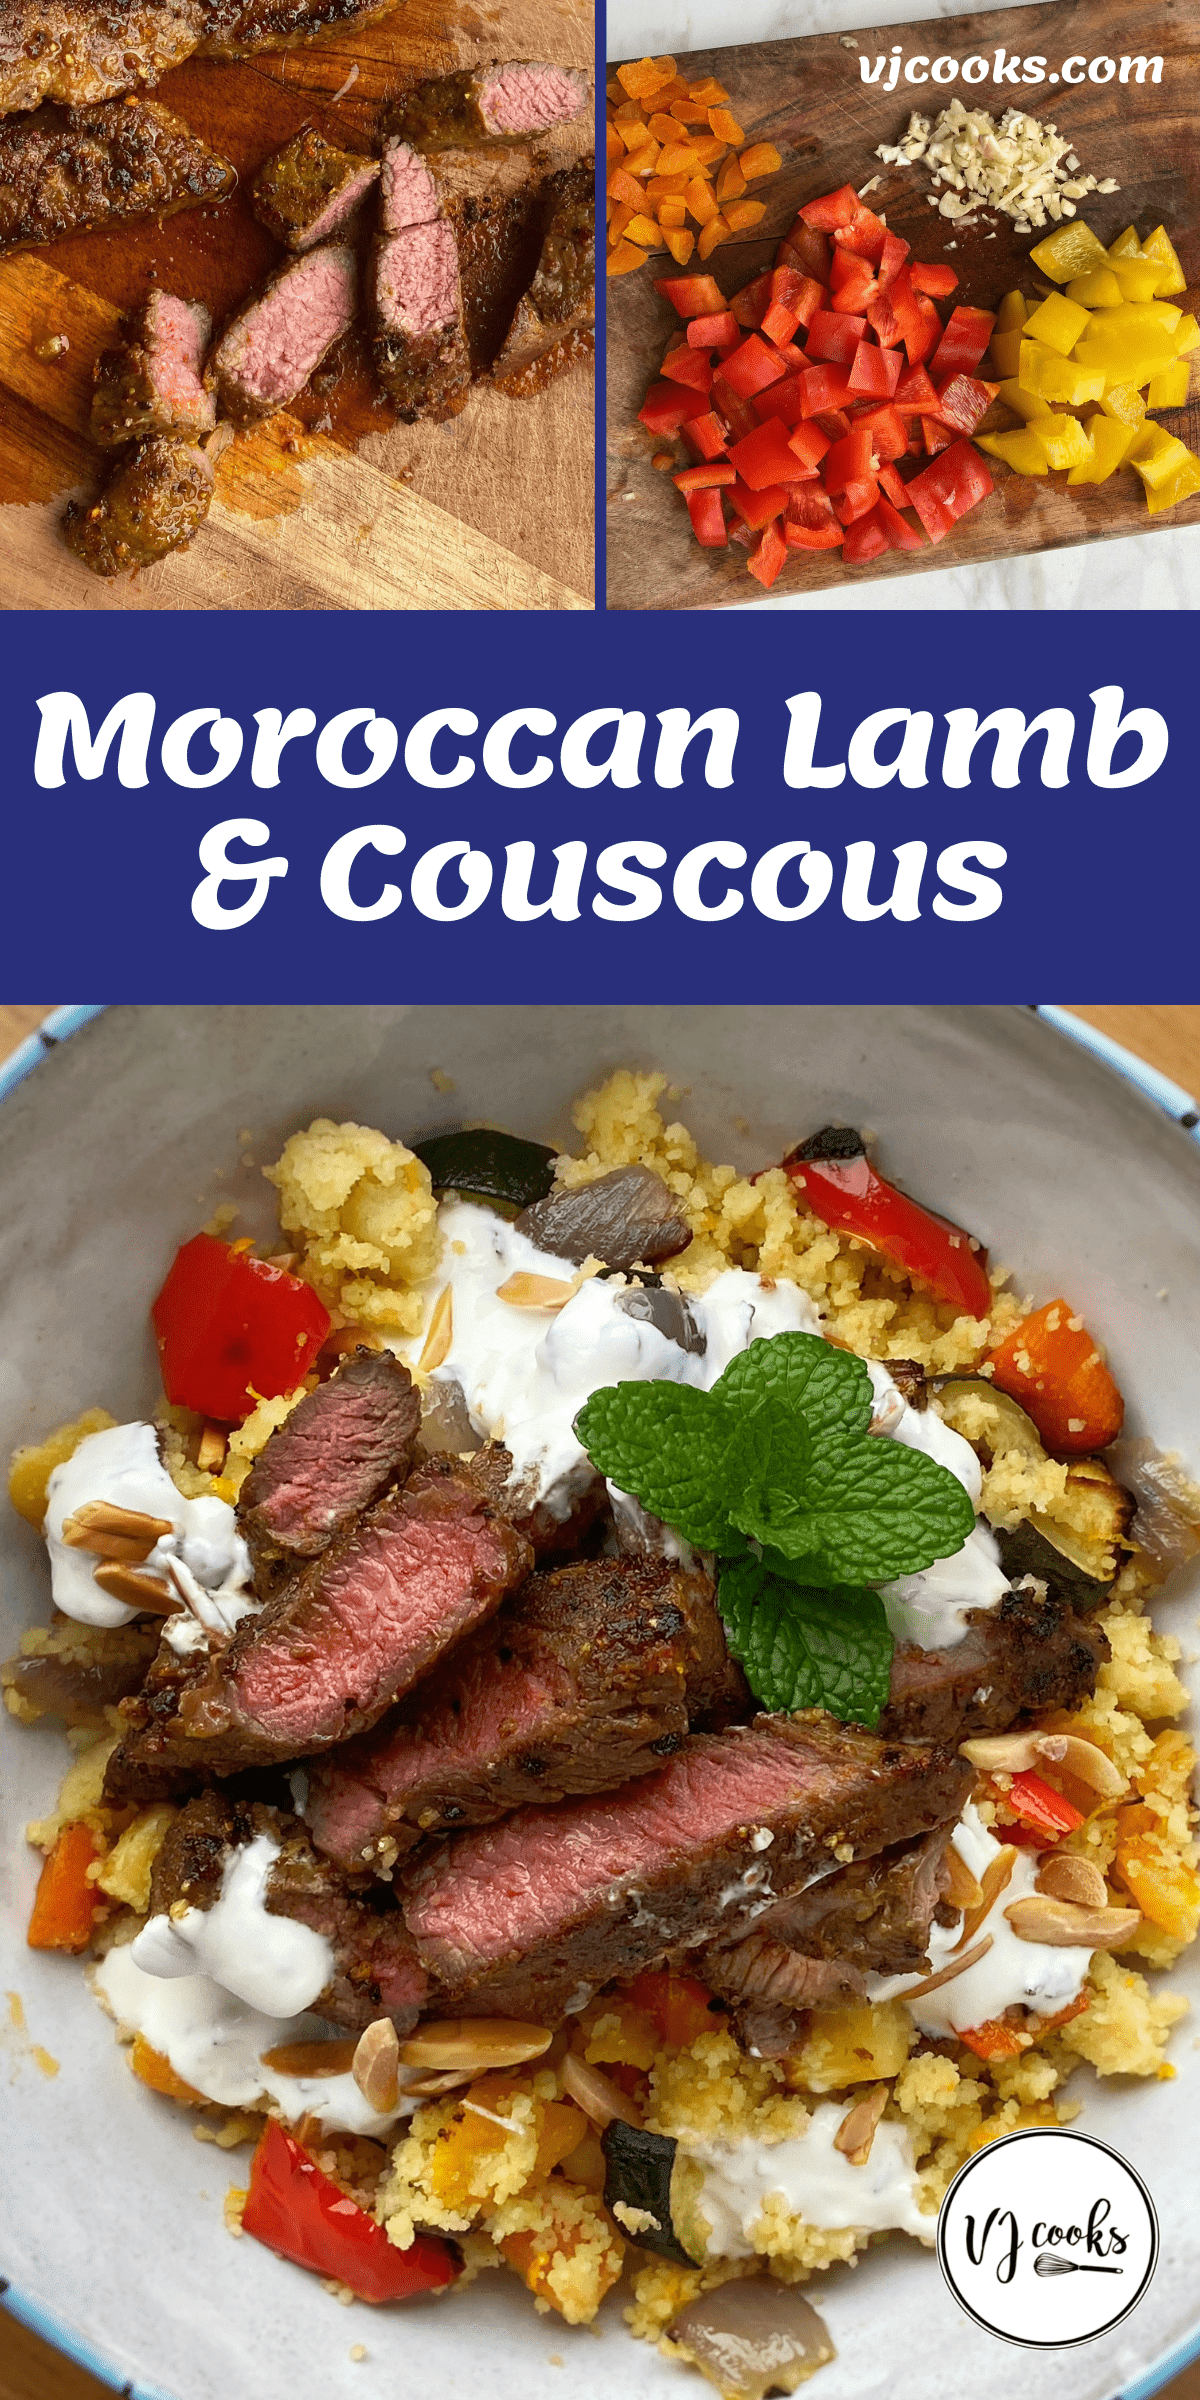 The process of making Moroccan Lamb and couscous